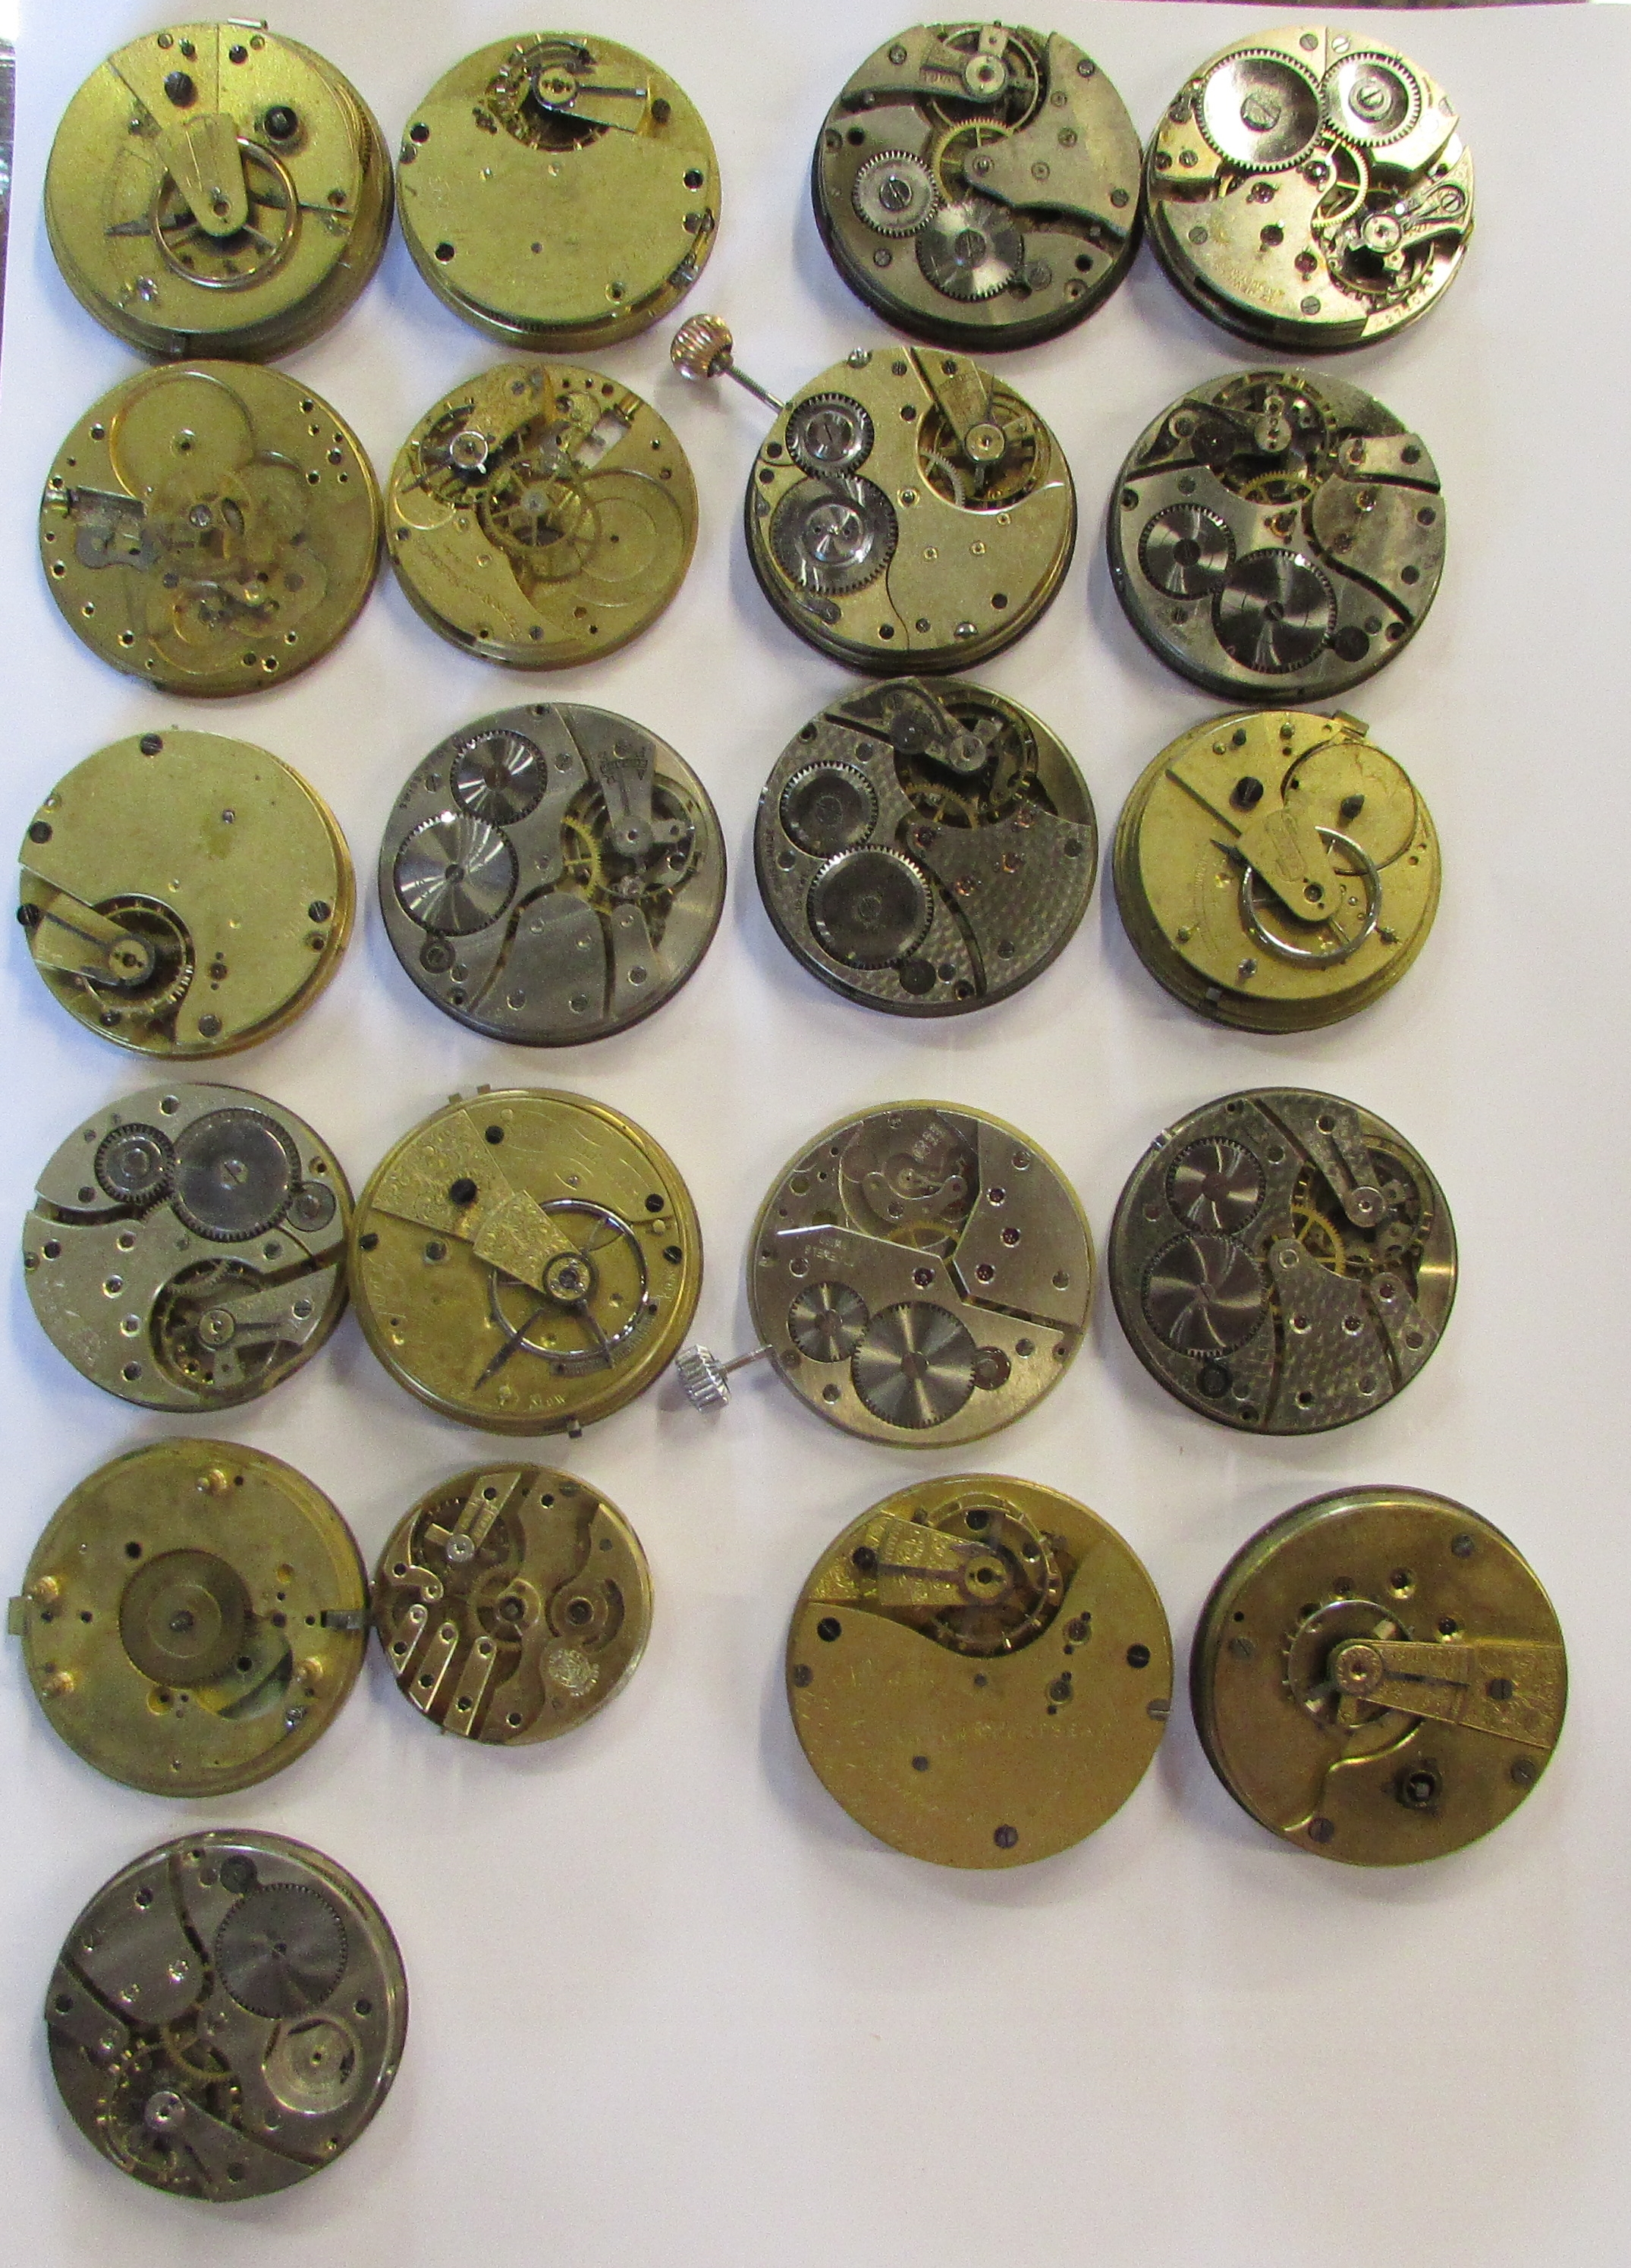 45 pocket watch movements and dials for spares or repairs, including makers Montine of Switzerland, - Image 3 of 3